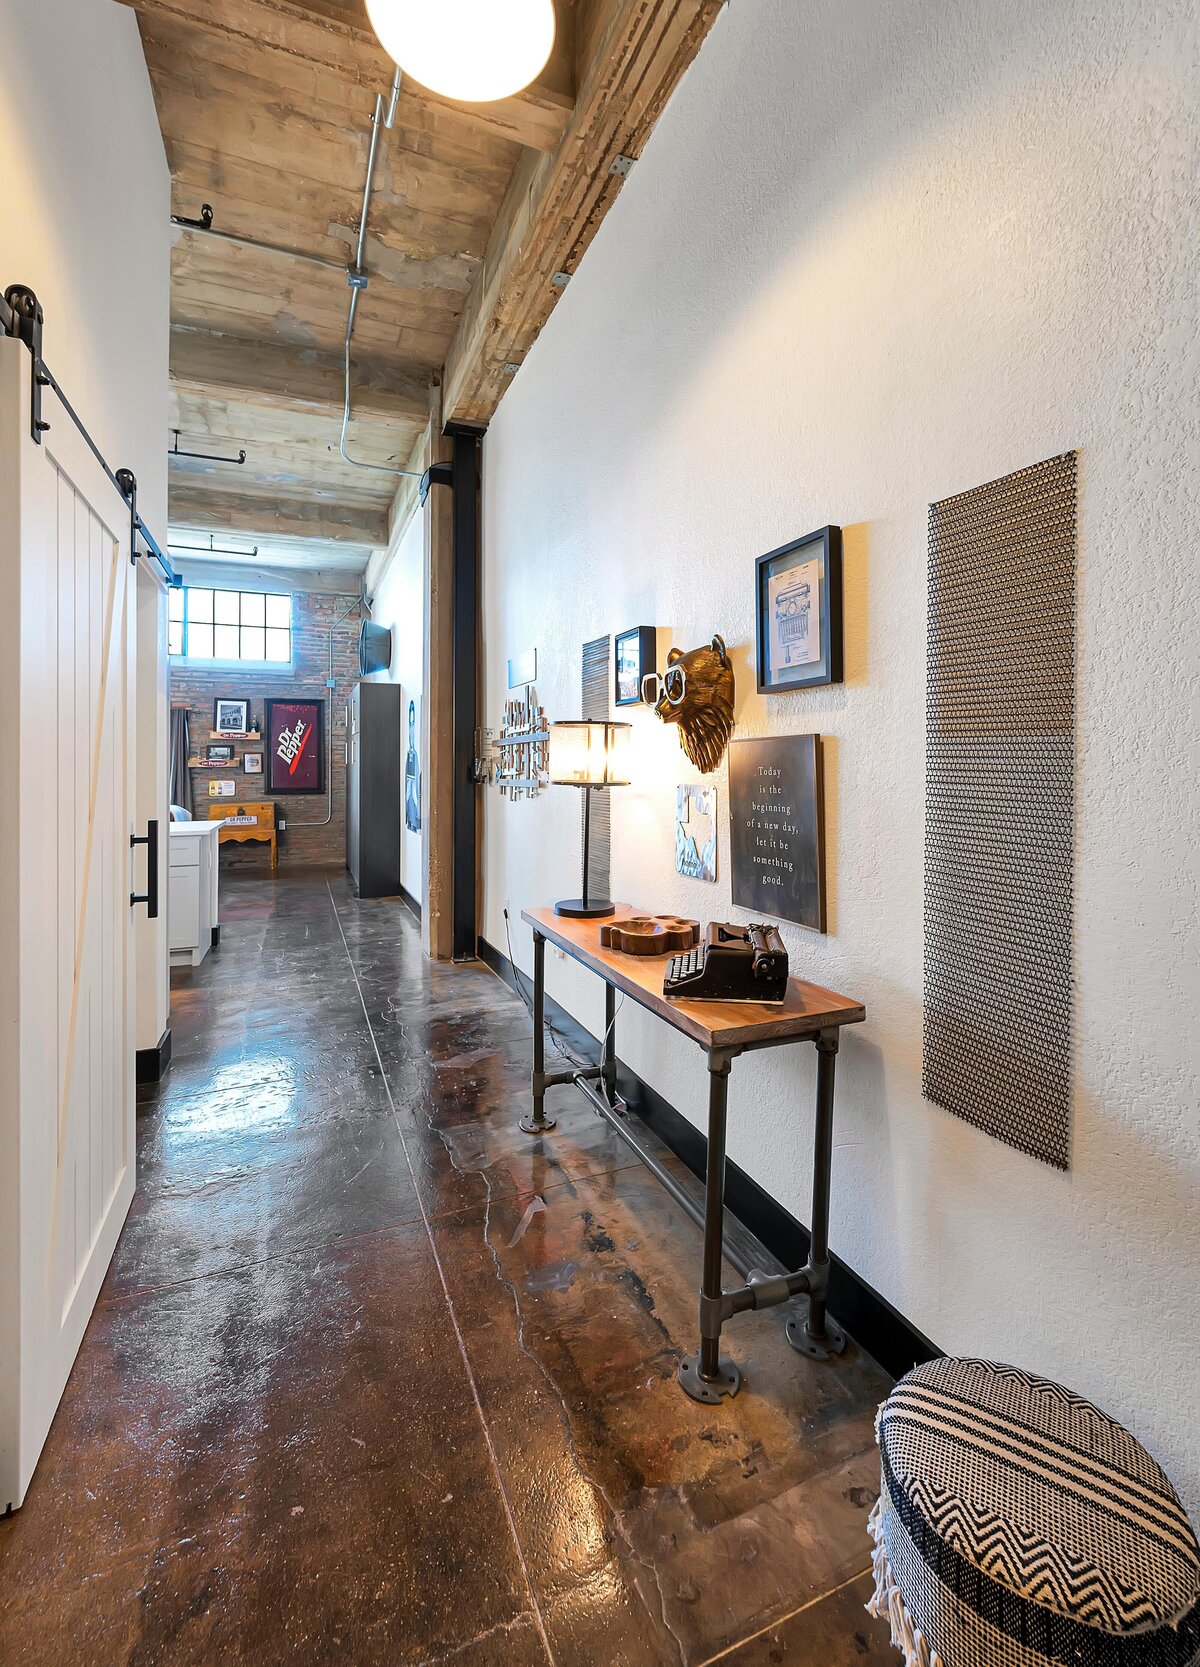 This is the entry space with entry table at this one-bedroom, one-bathroom vintage industrial condo with Smart TV, free Wi-Fi, and washer/dryer located in downtown Waco, TX.